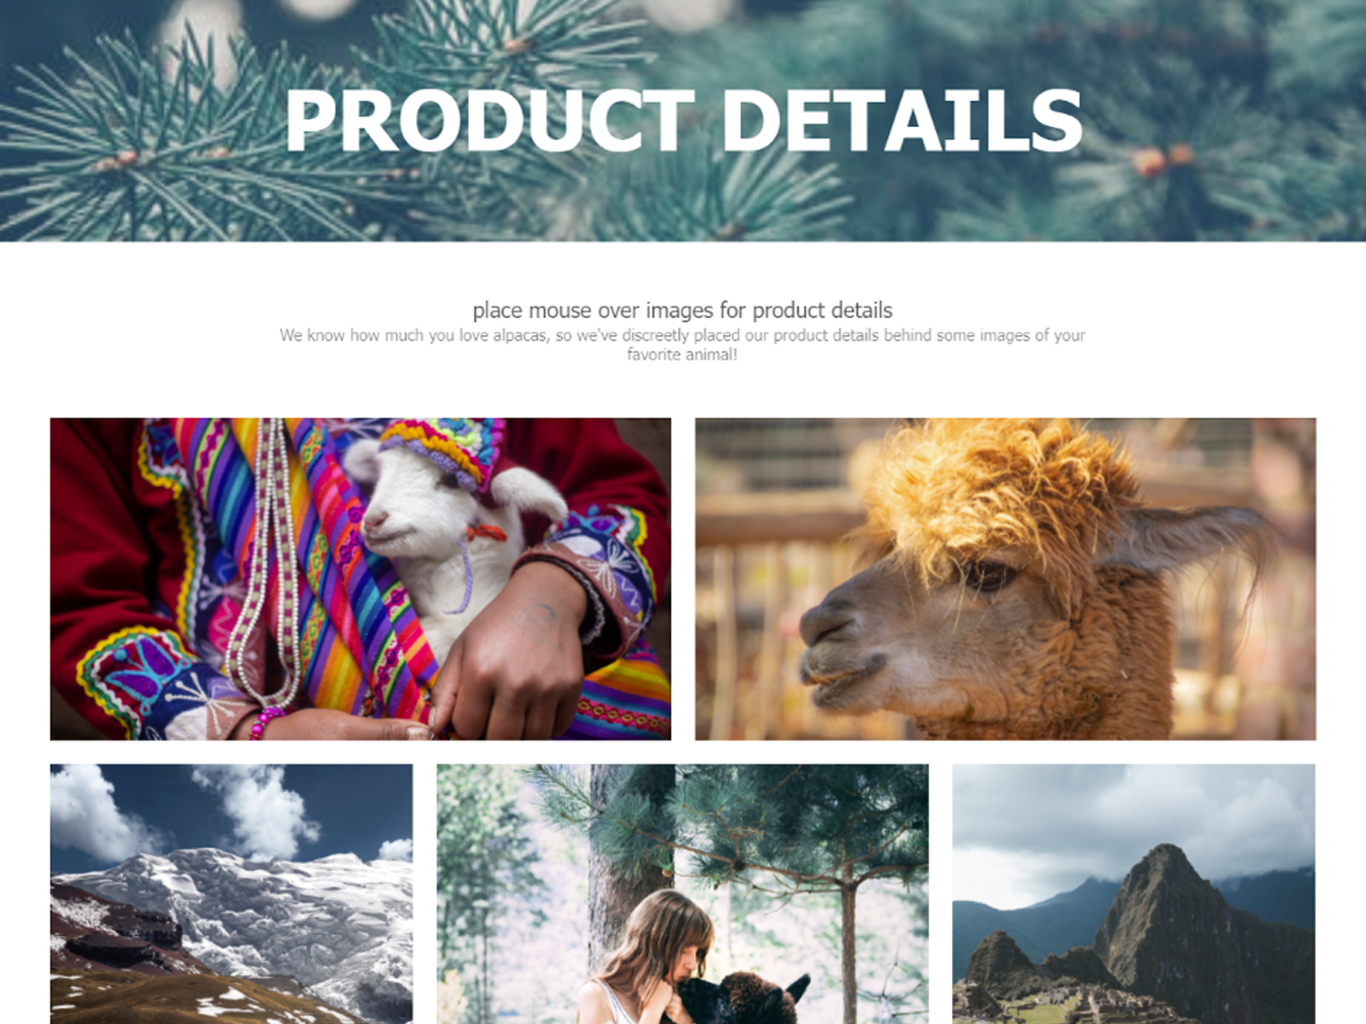 A webpage for Product Details of a fictional company selling alpaca wool products; the page is filled with images of alpacas.